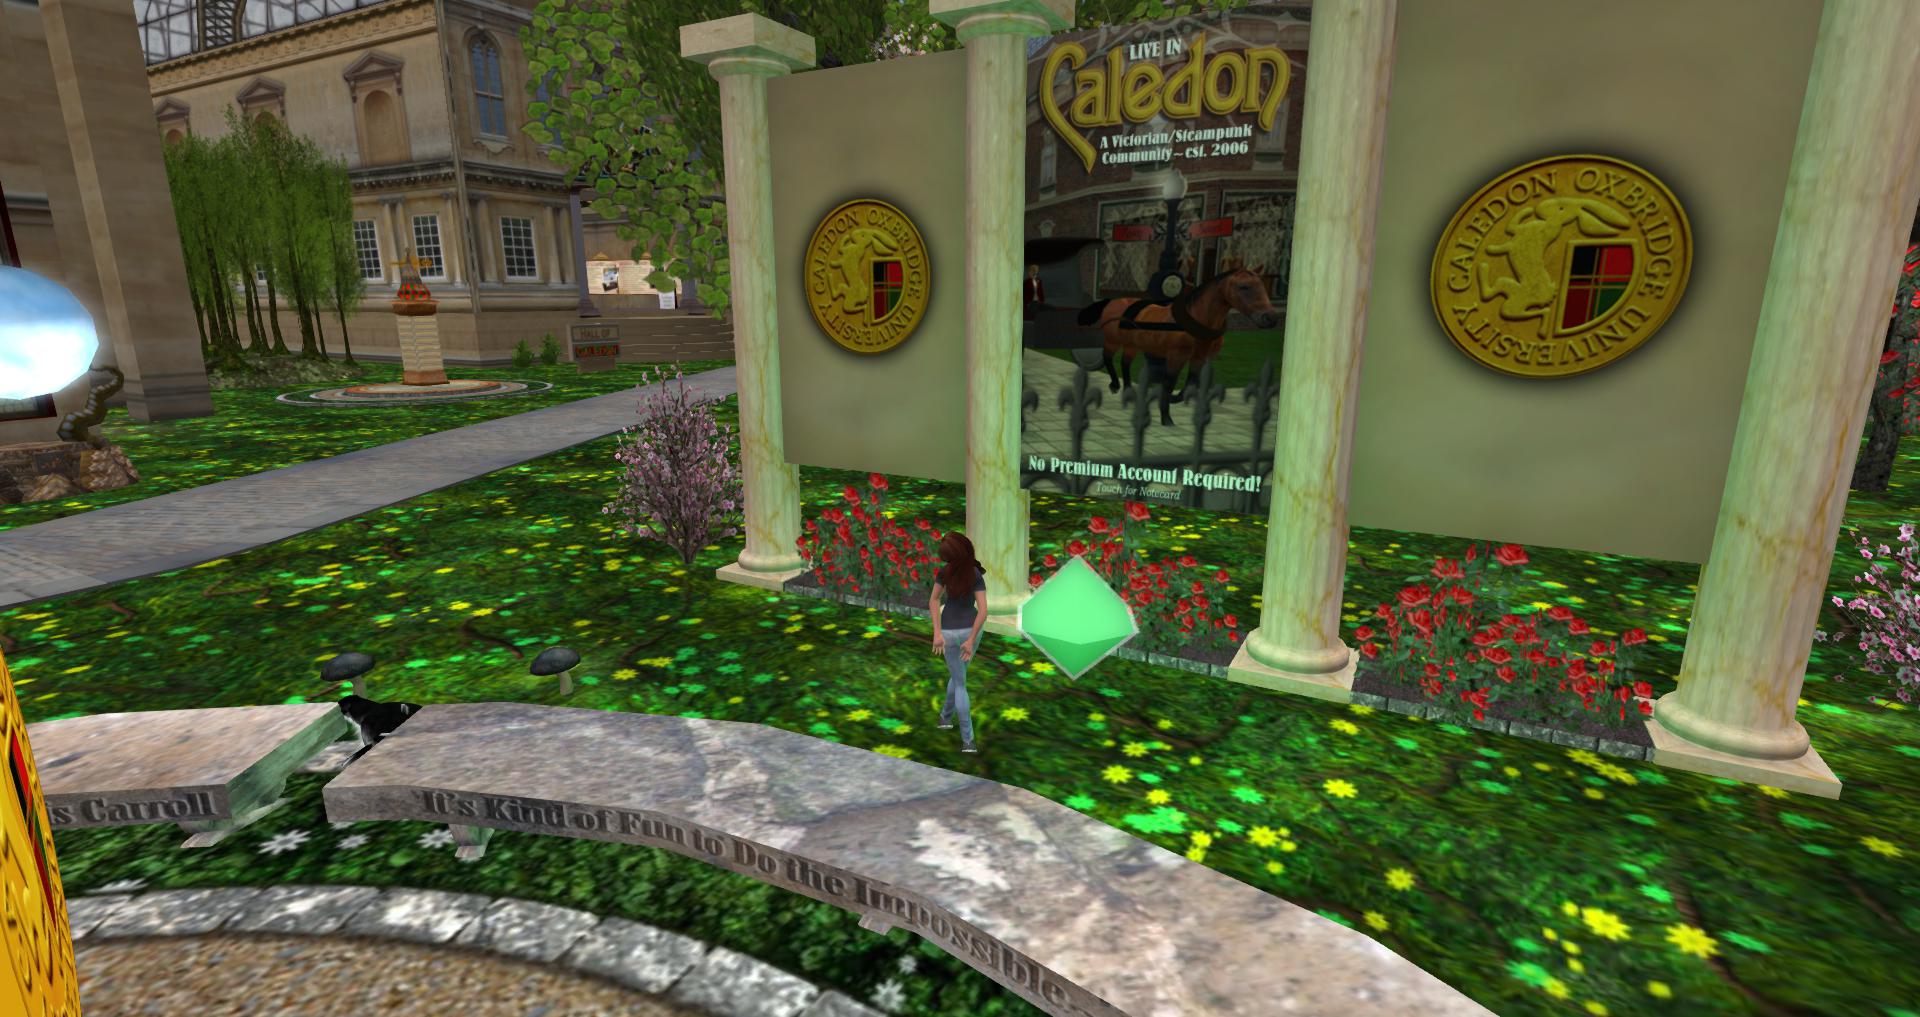 Arriving at the Caledon Community. Image by Jana Allemand-Zeman.